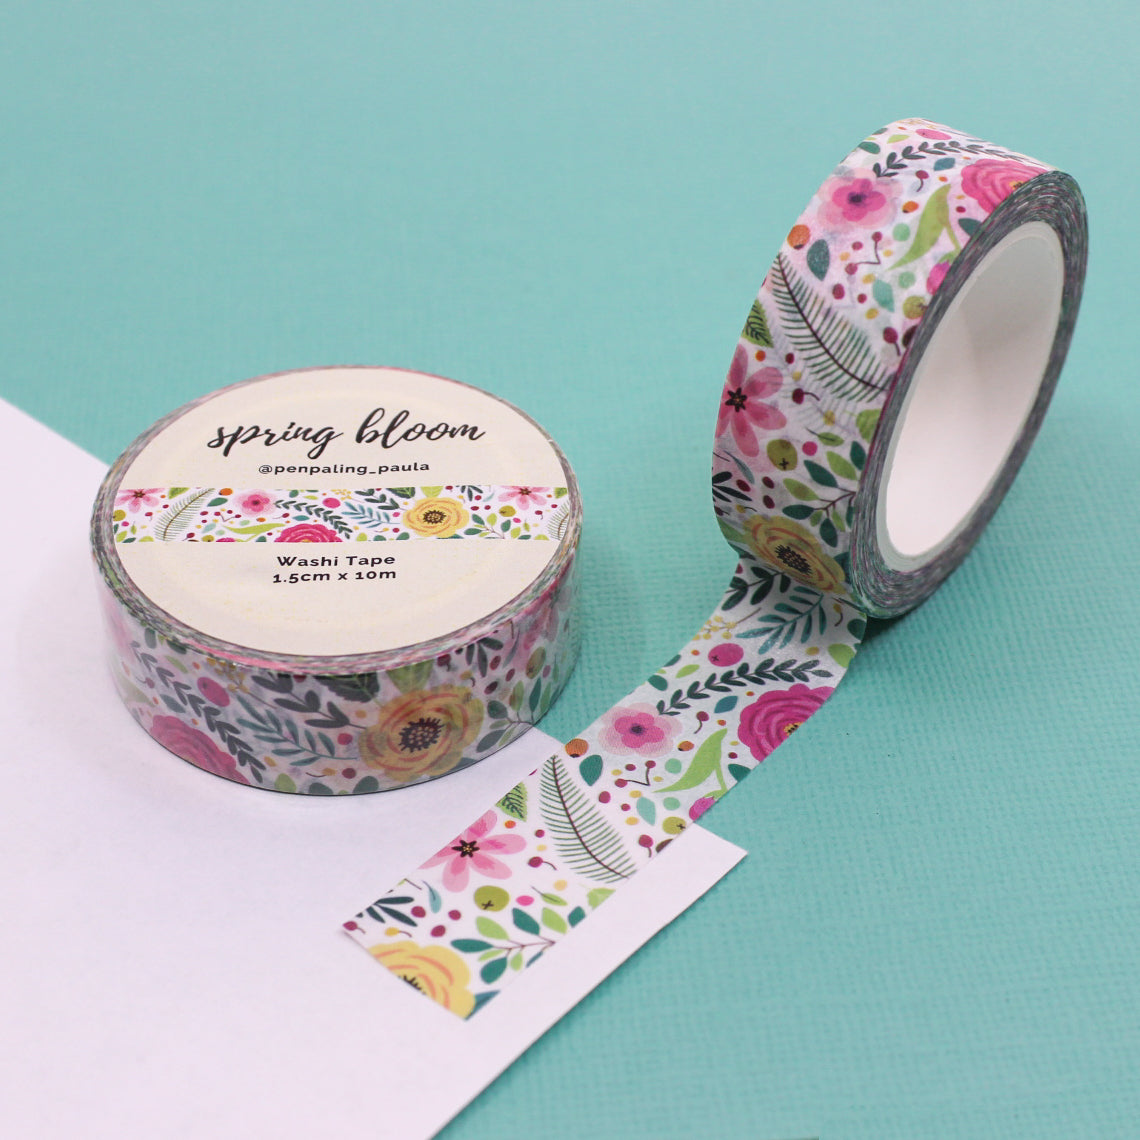 Spring Pink Blooms Washi Tape: Delicate pink floral washi tape, ideal for adding a touch of springtime elegance to your crafting projects and journals. This tape is designed by Penpaling Paula and sold at BBB Supplies Craft Shop.